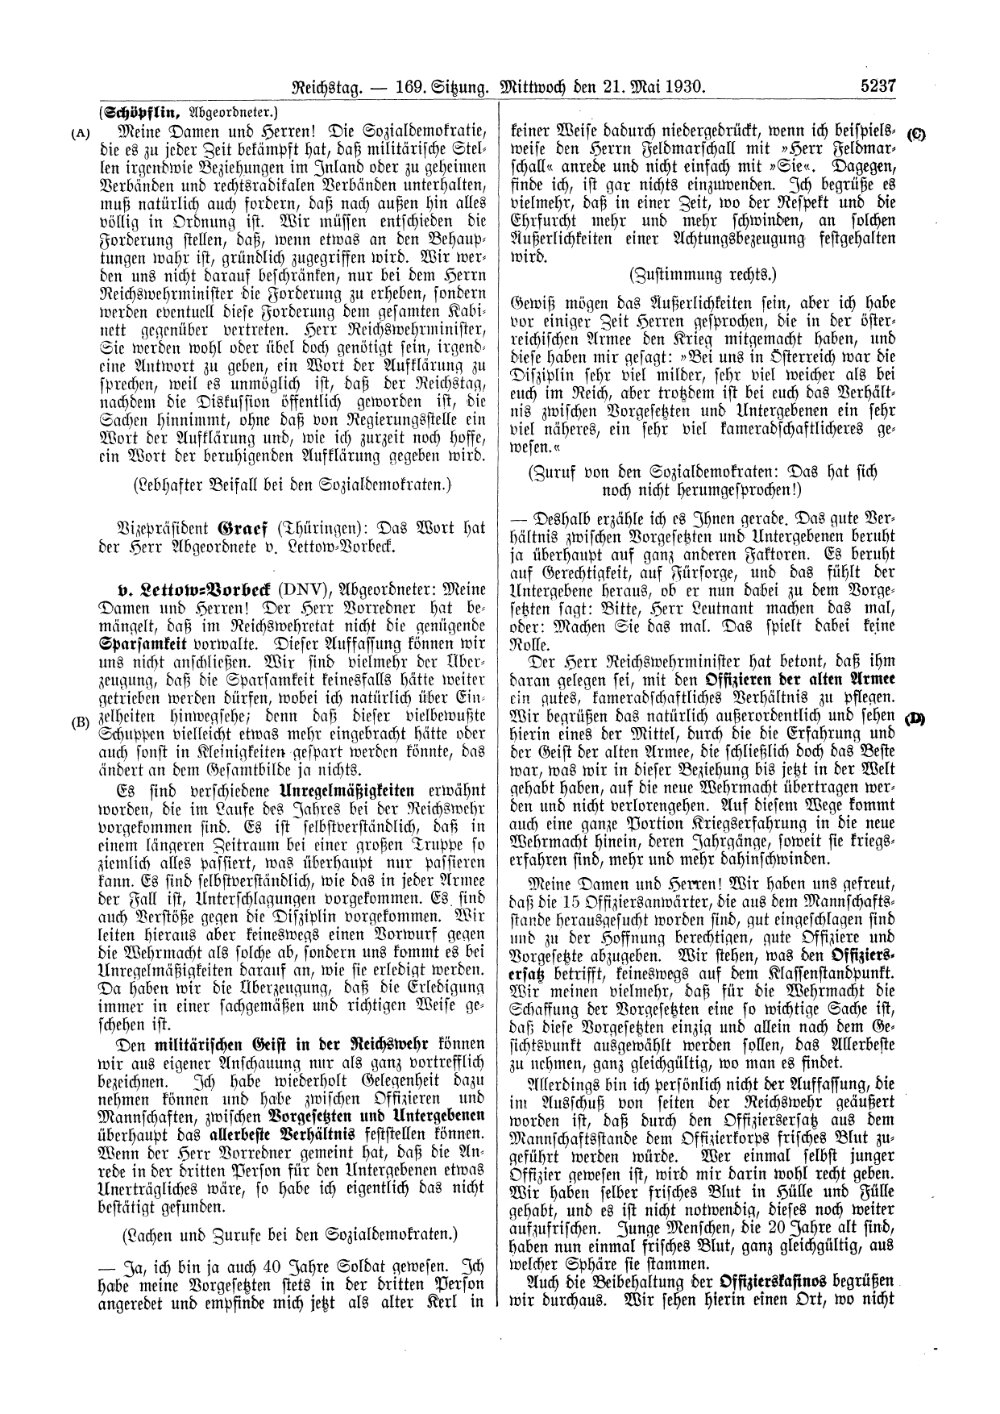 Scan of page 5237